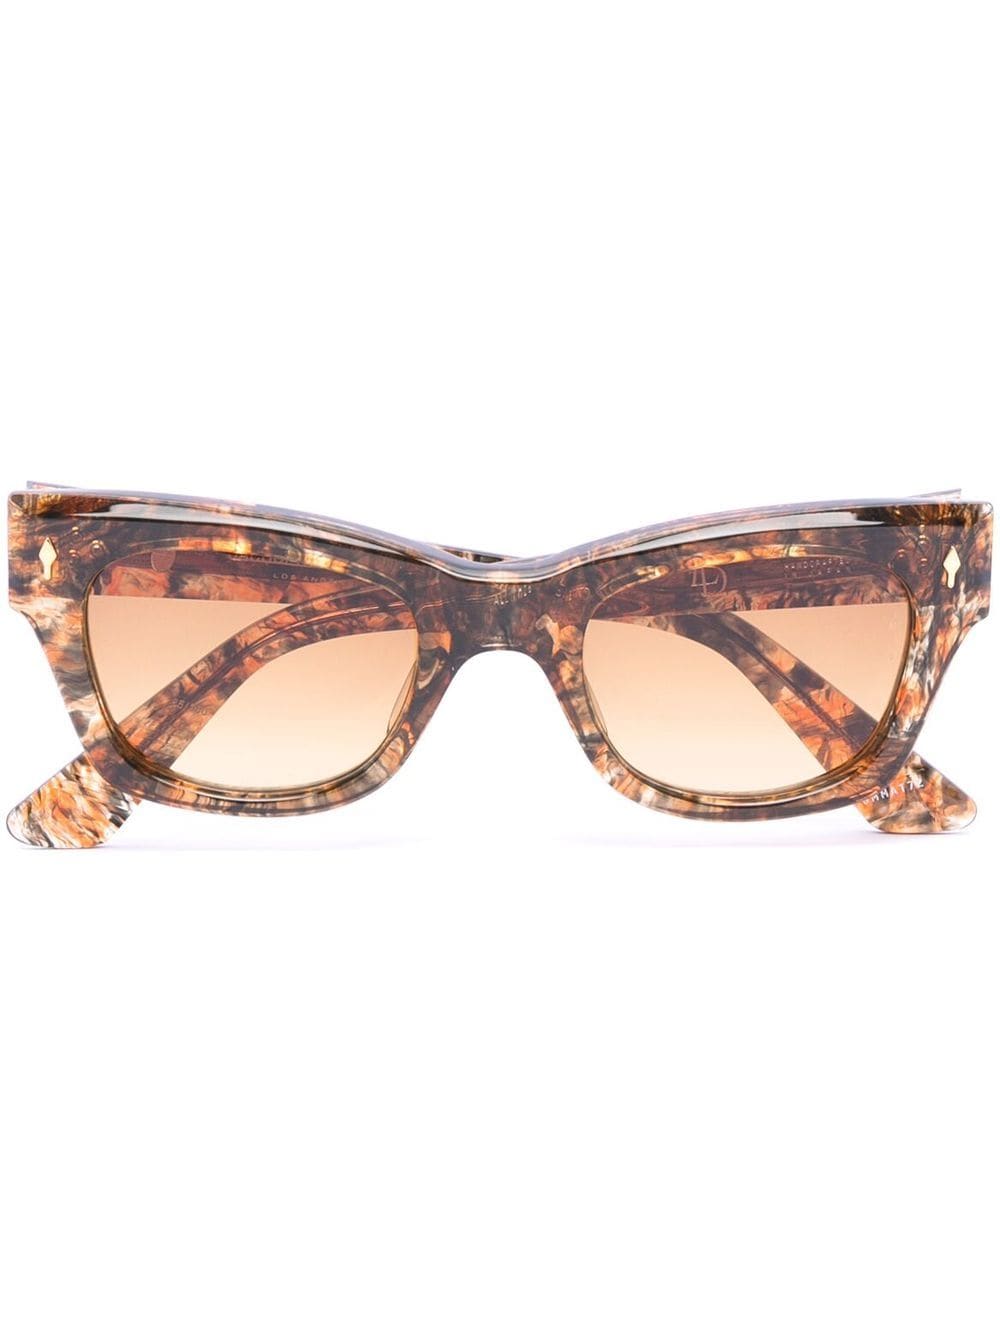 Jacques Marie Mage All These Nights cat-eye sunglasses - Brown von Jacques Marie Mage